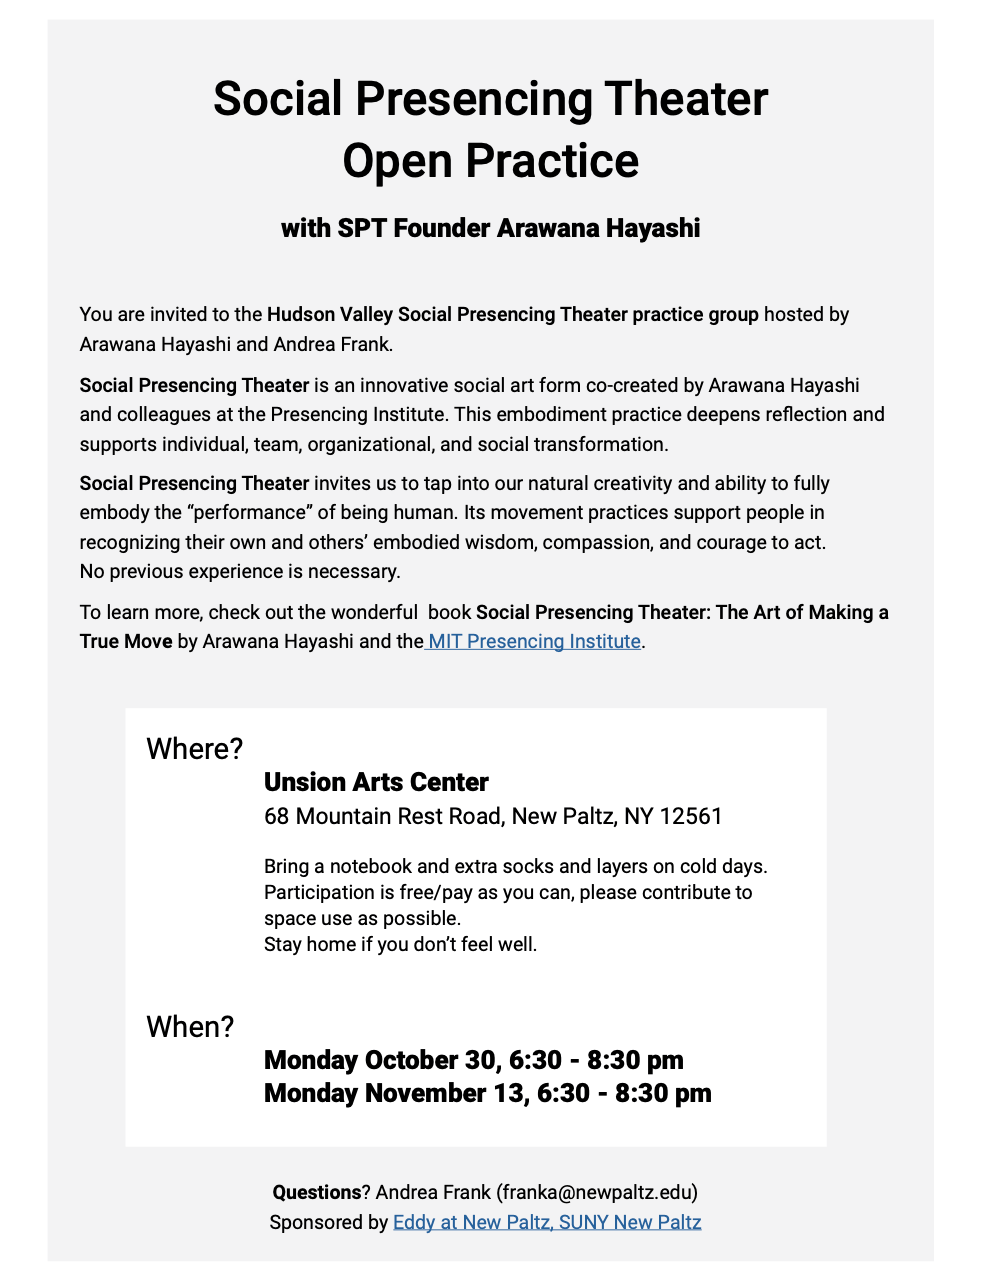 Social Presencing Theater Open Practice with SPT Founder Arawana Hayashi